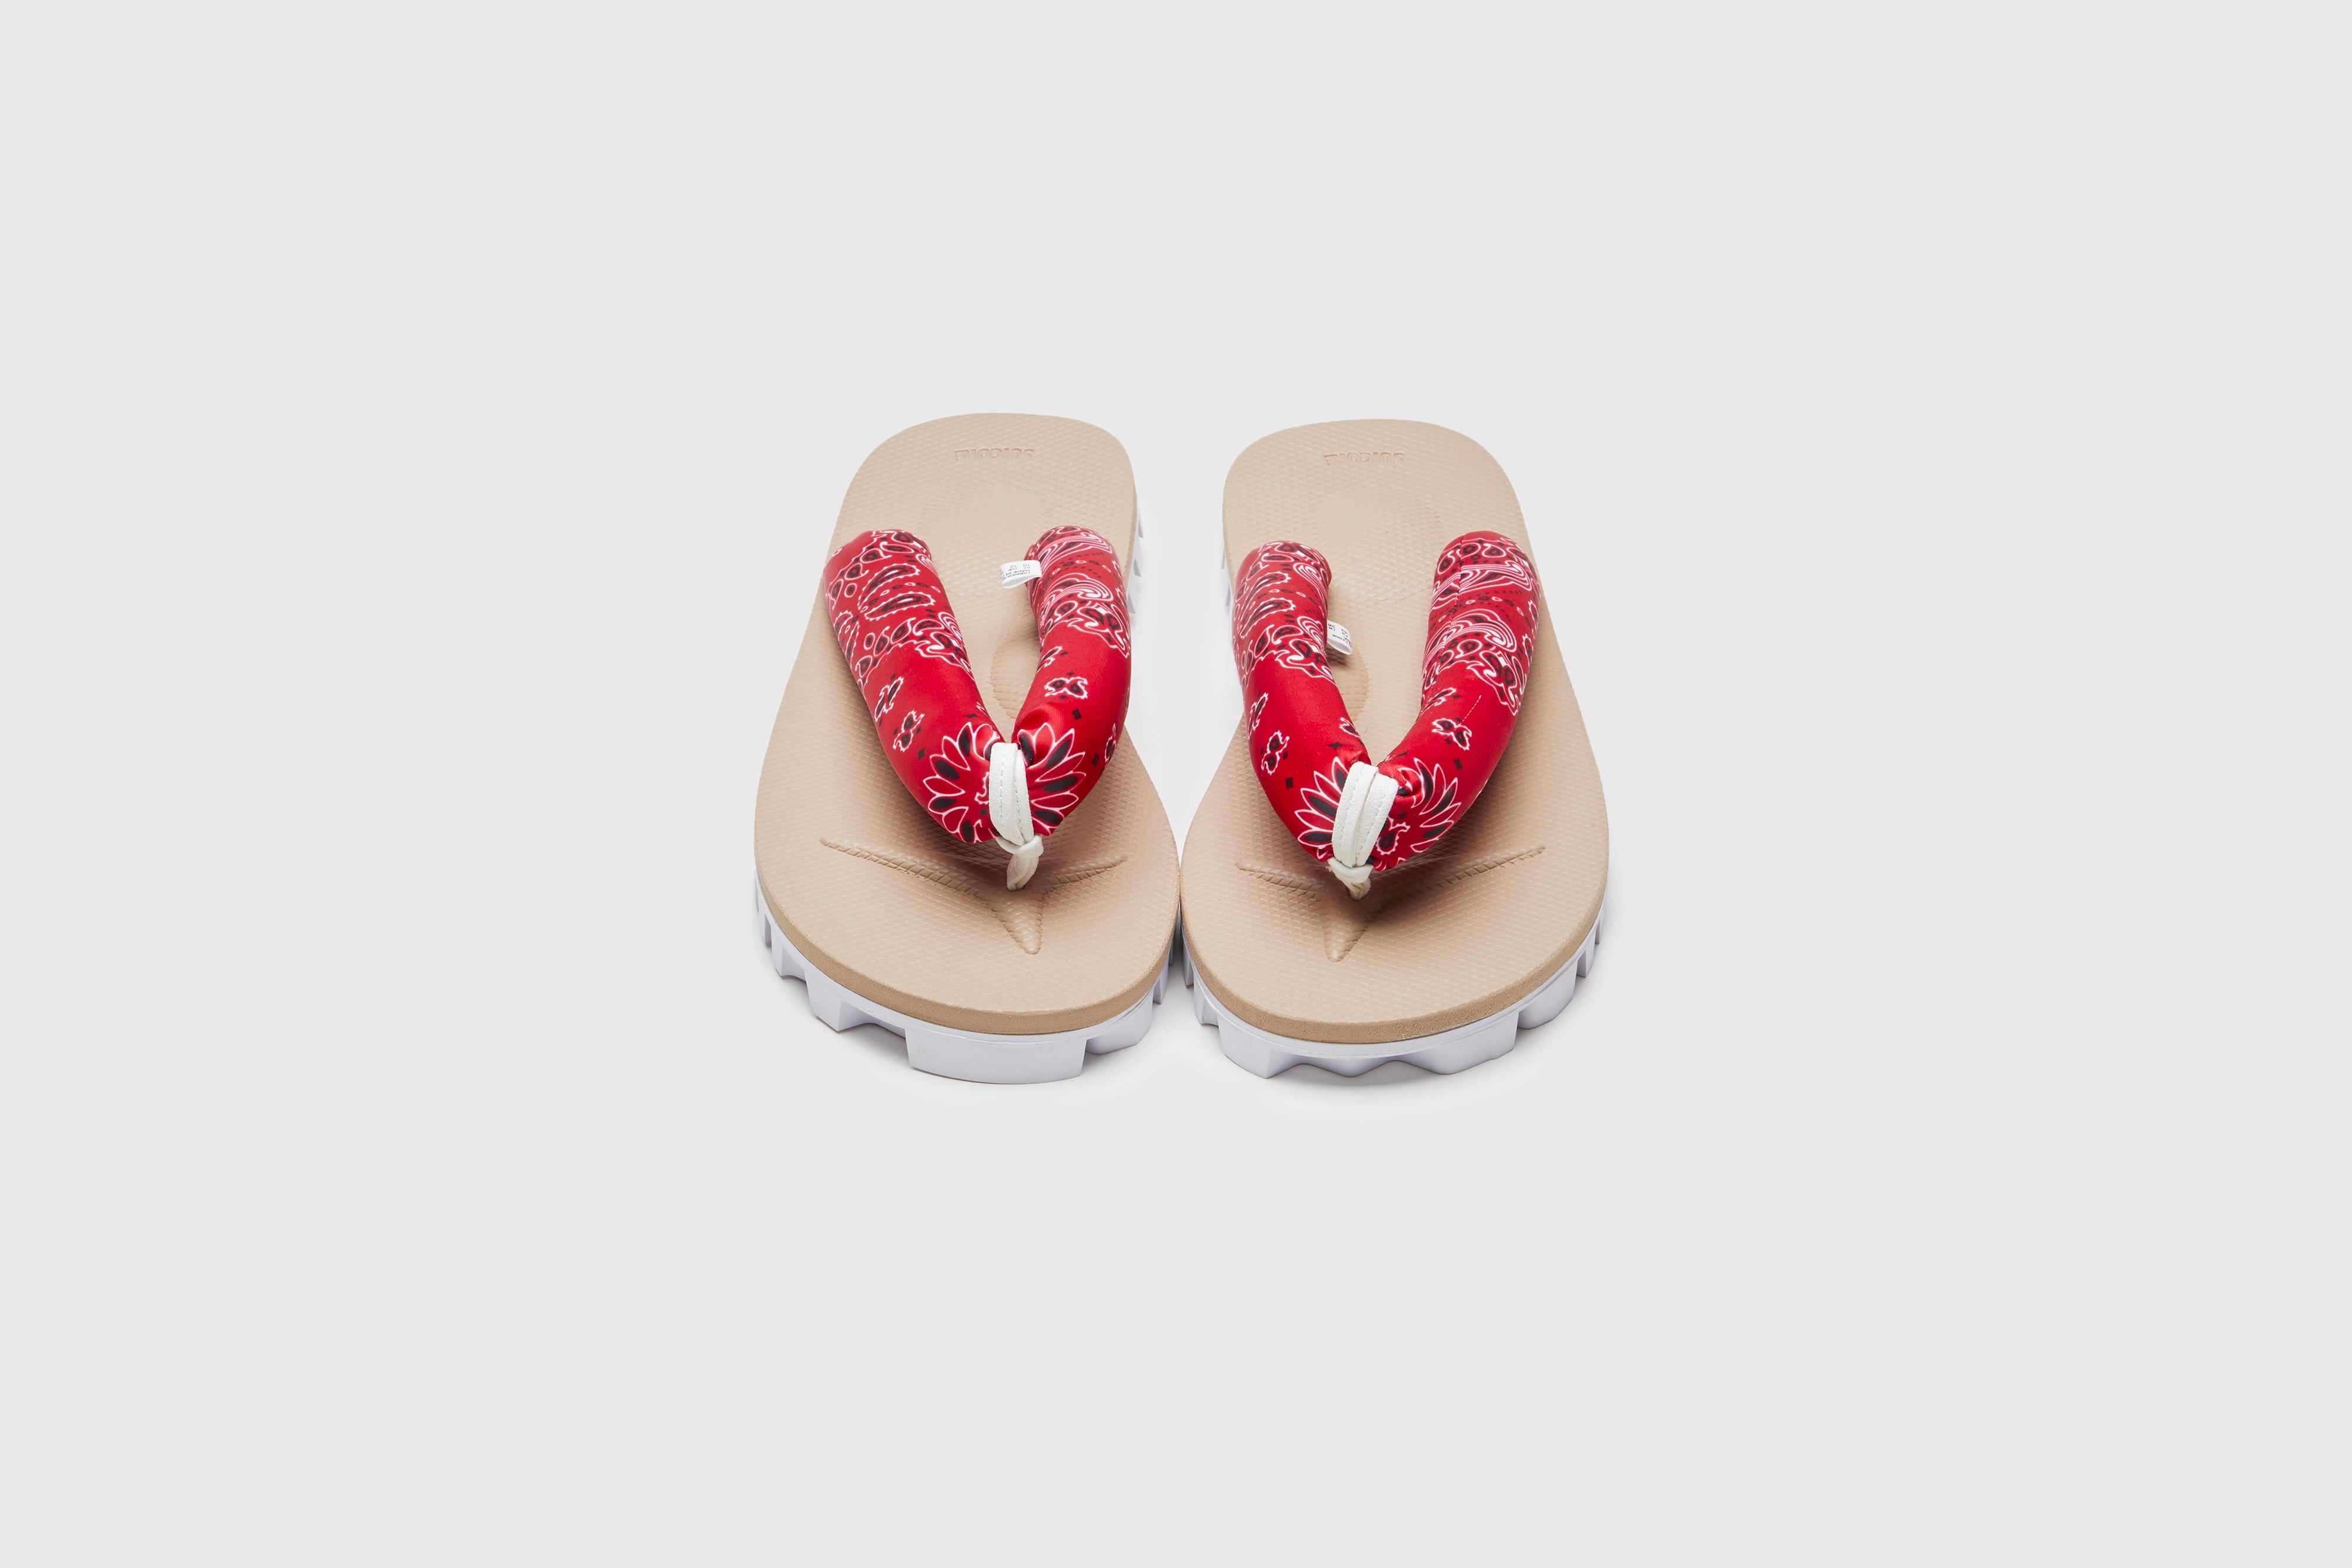 SUICOKE GTA-PT05 sandals with red & beige nylon upper, red & beige midsole and sole, strap and logo patch. From Spring/Summer 2023 collection on eightywingold Web Store, an official partner of SUICOKE. OG-226-PT05 RED X BEIGE